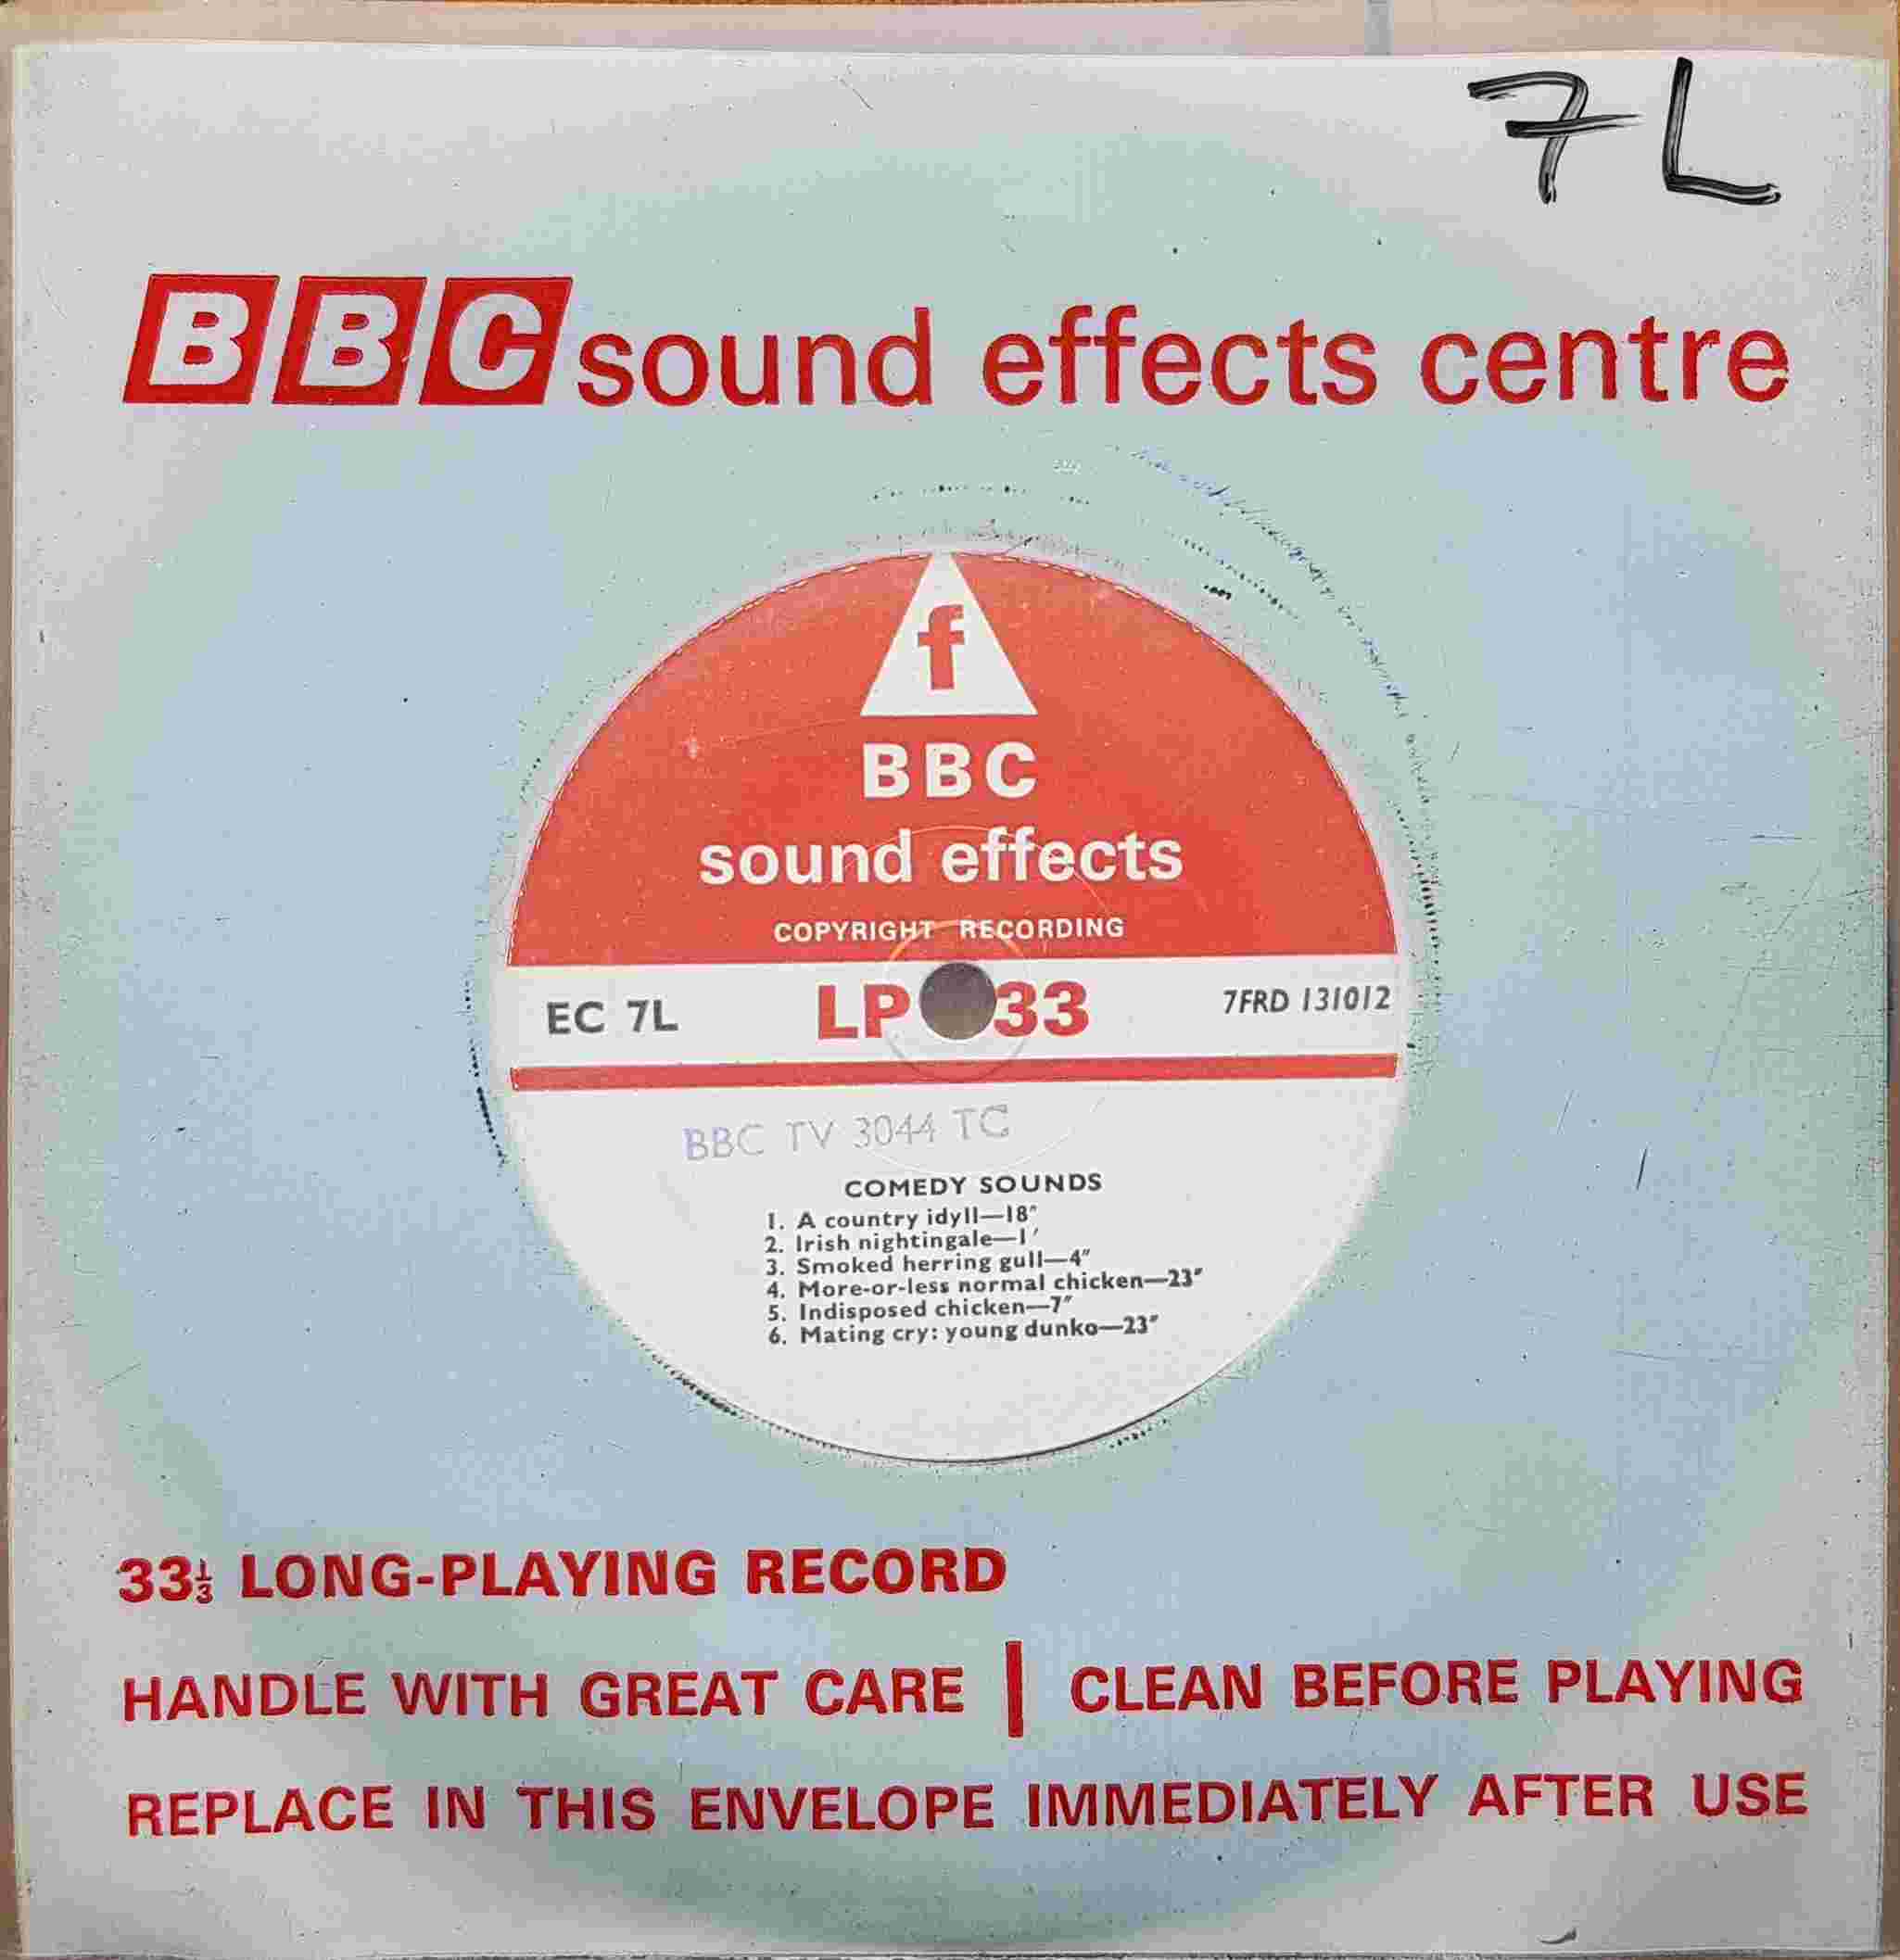 Picture of EC 7L Comedy sounds by artist Not registered from the BBC singles - Records and Tapes library